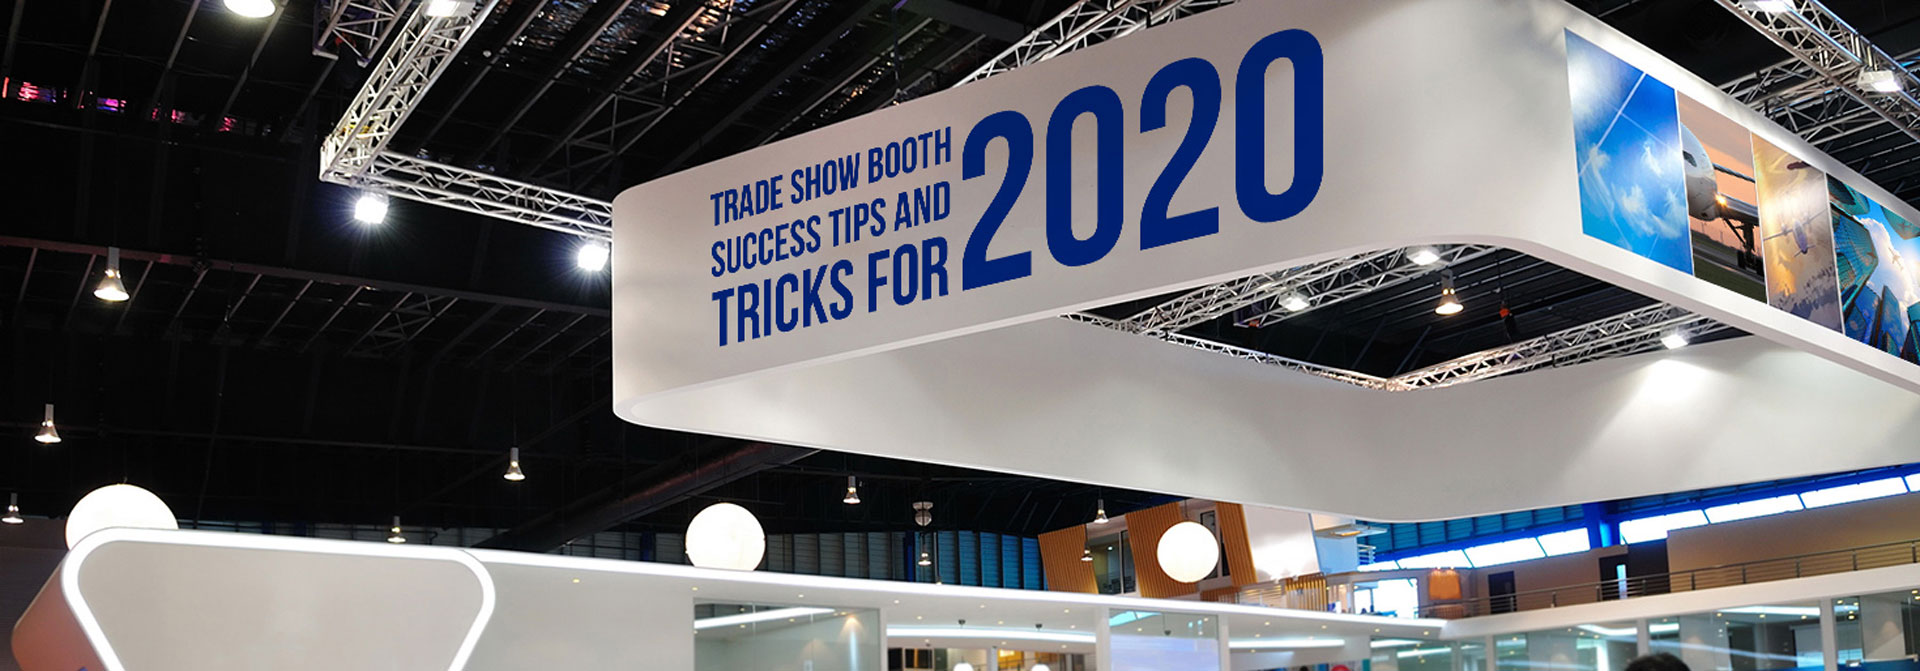 trade show booth success tips and tricks for 2020